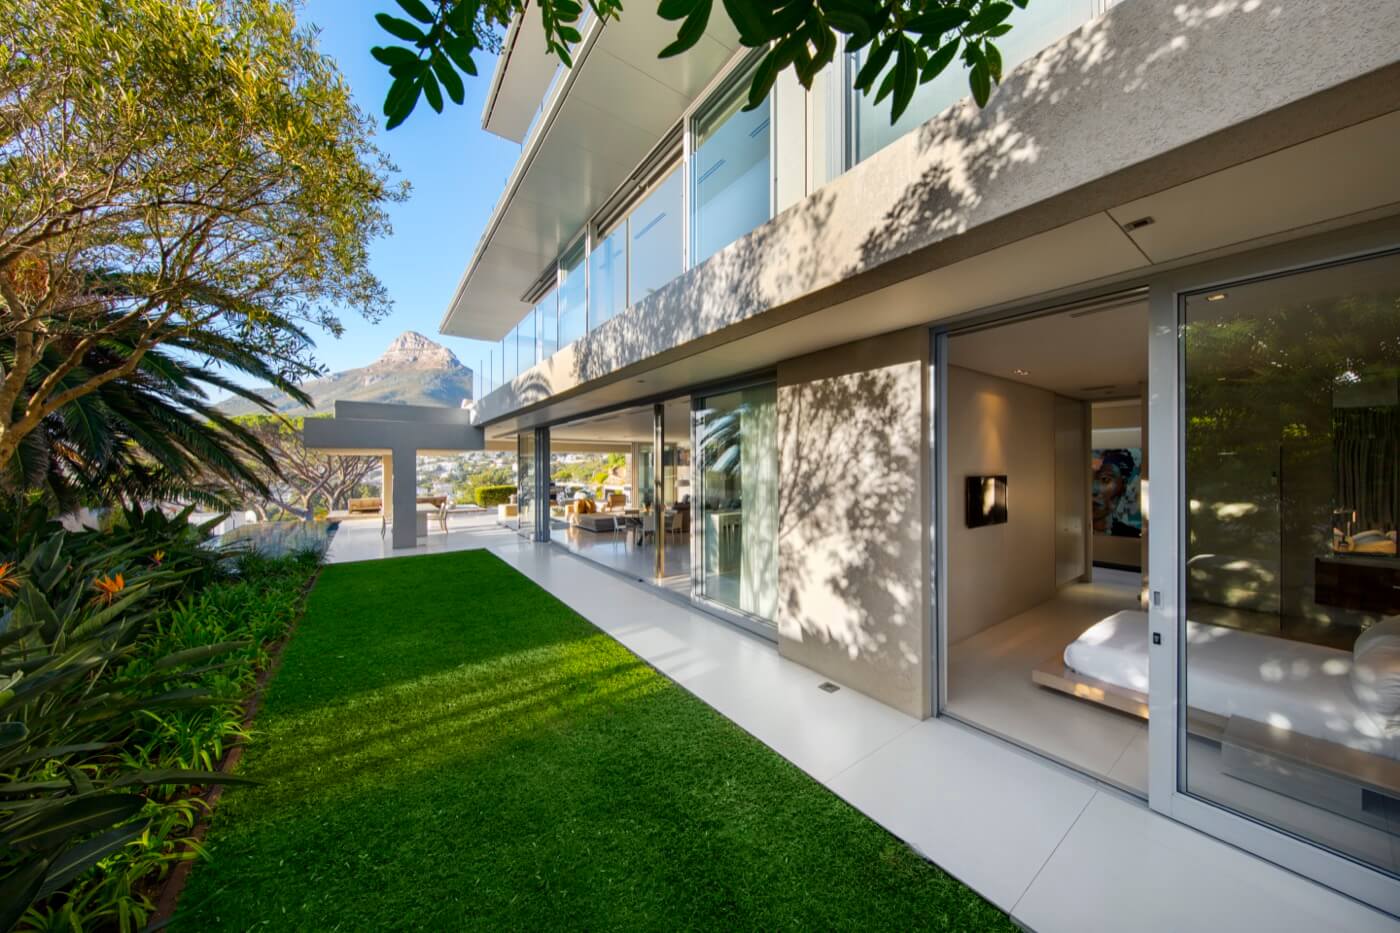 Photo 6 of The Crescent accommodation in Camps Bay, Cape Town with 6 bedrooms and 6.5 bathrooms